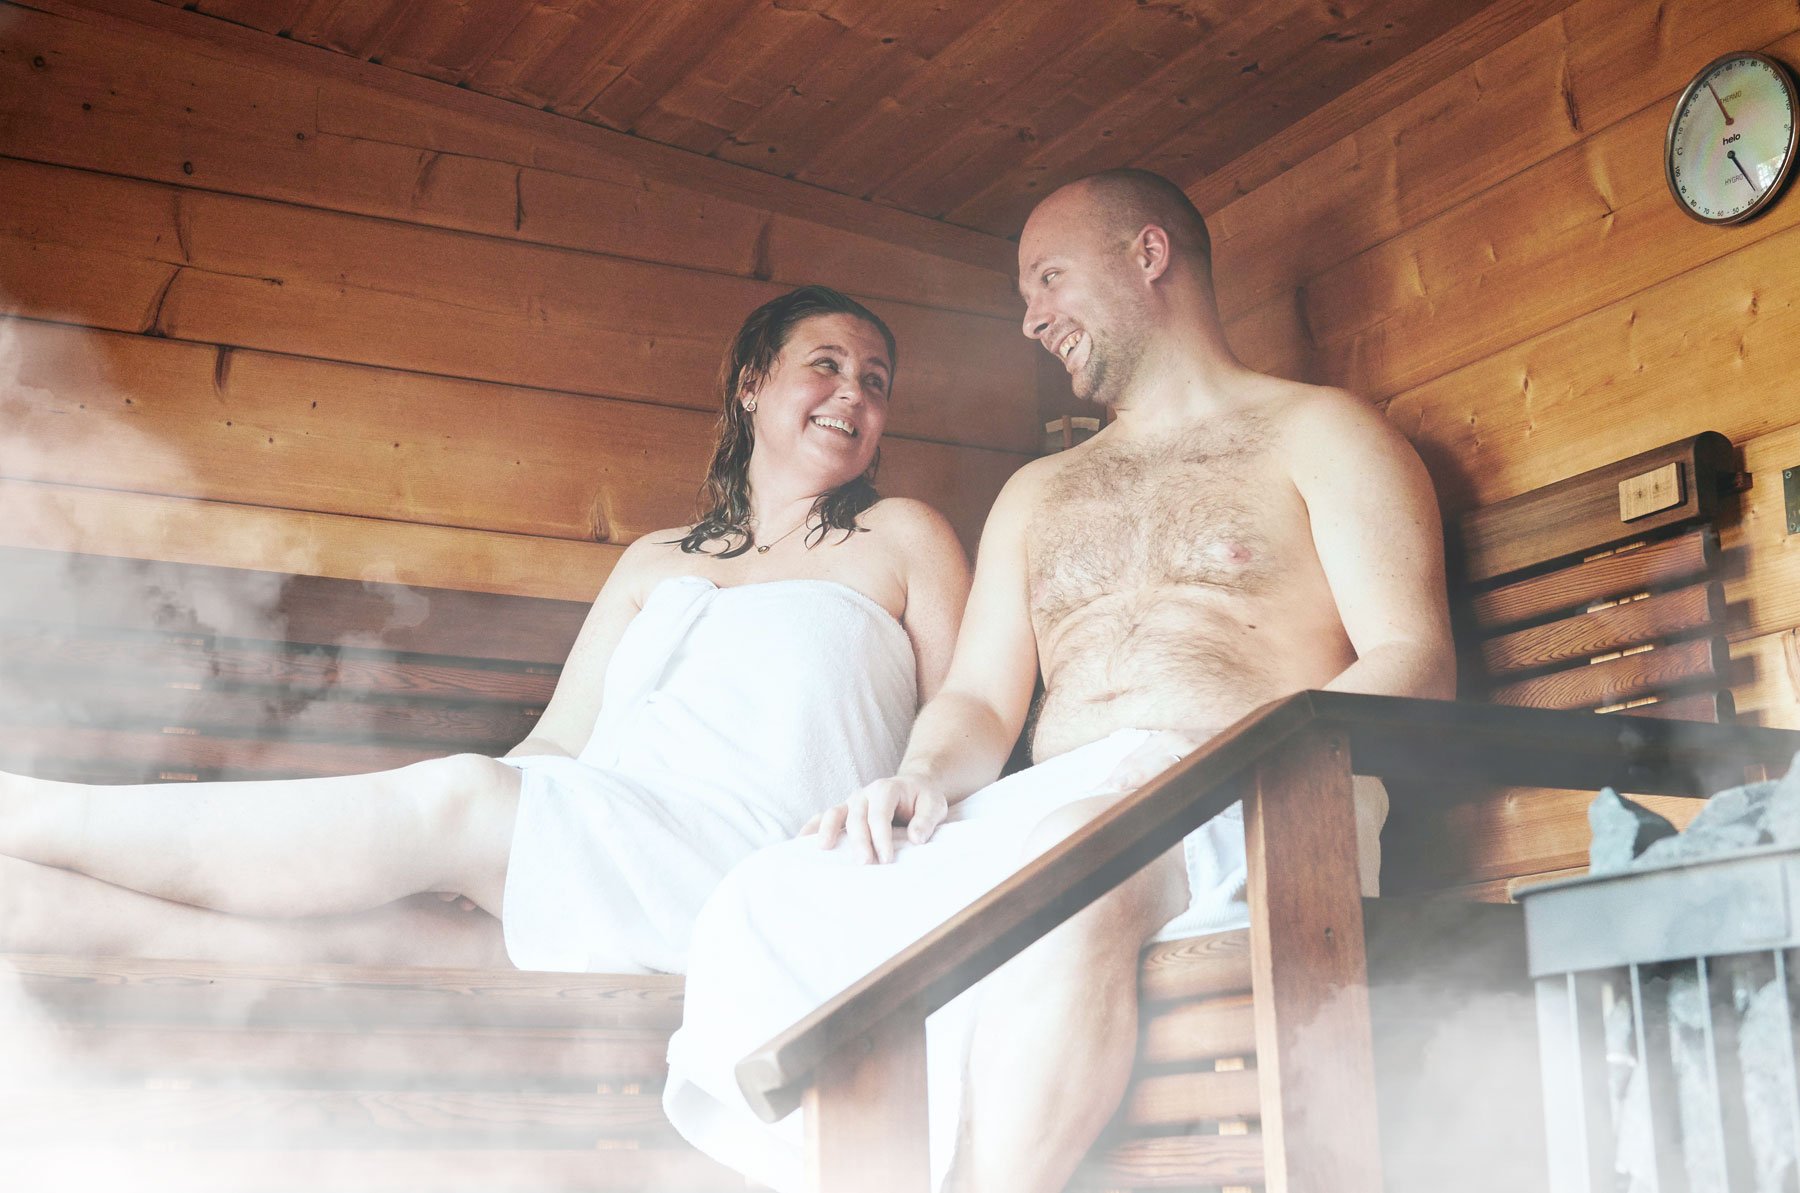 Löyly: An Essential Component of Traditional Finnish Sauna Bathing